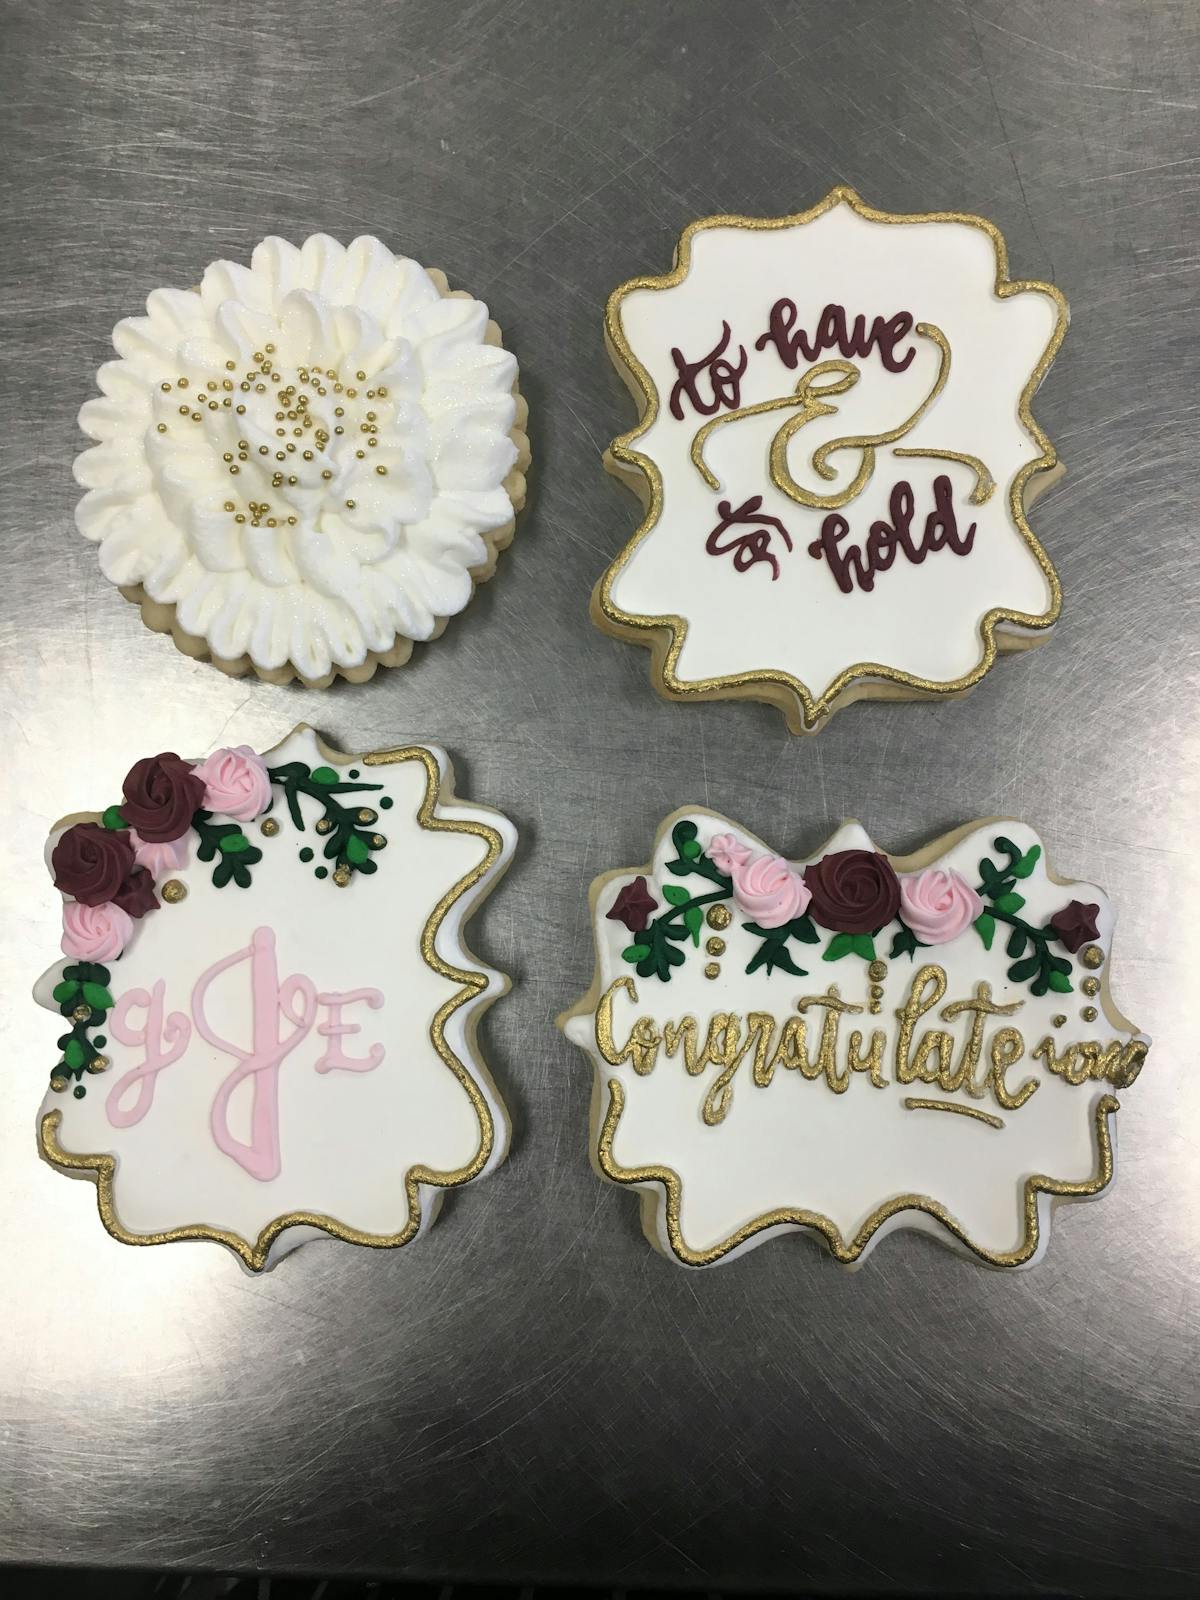 multiple decorated cookies sitting on a table